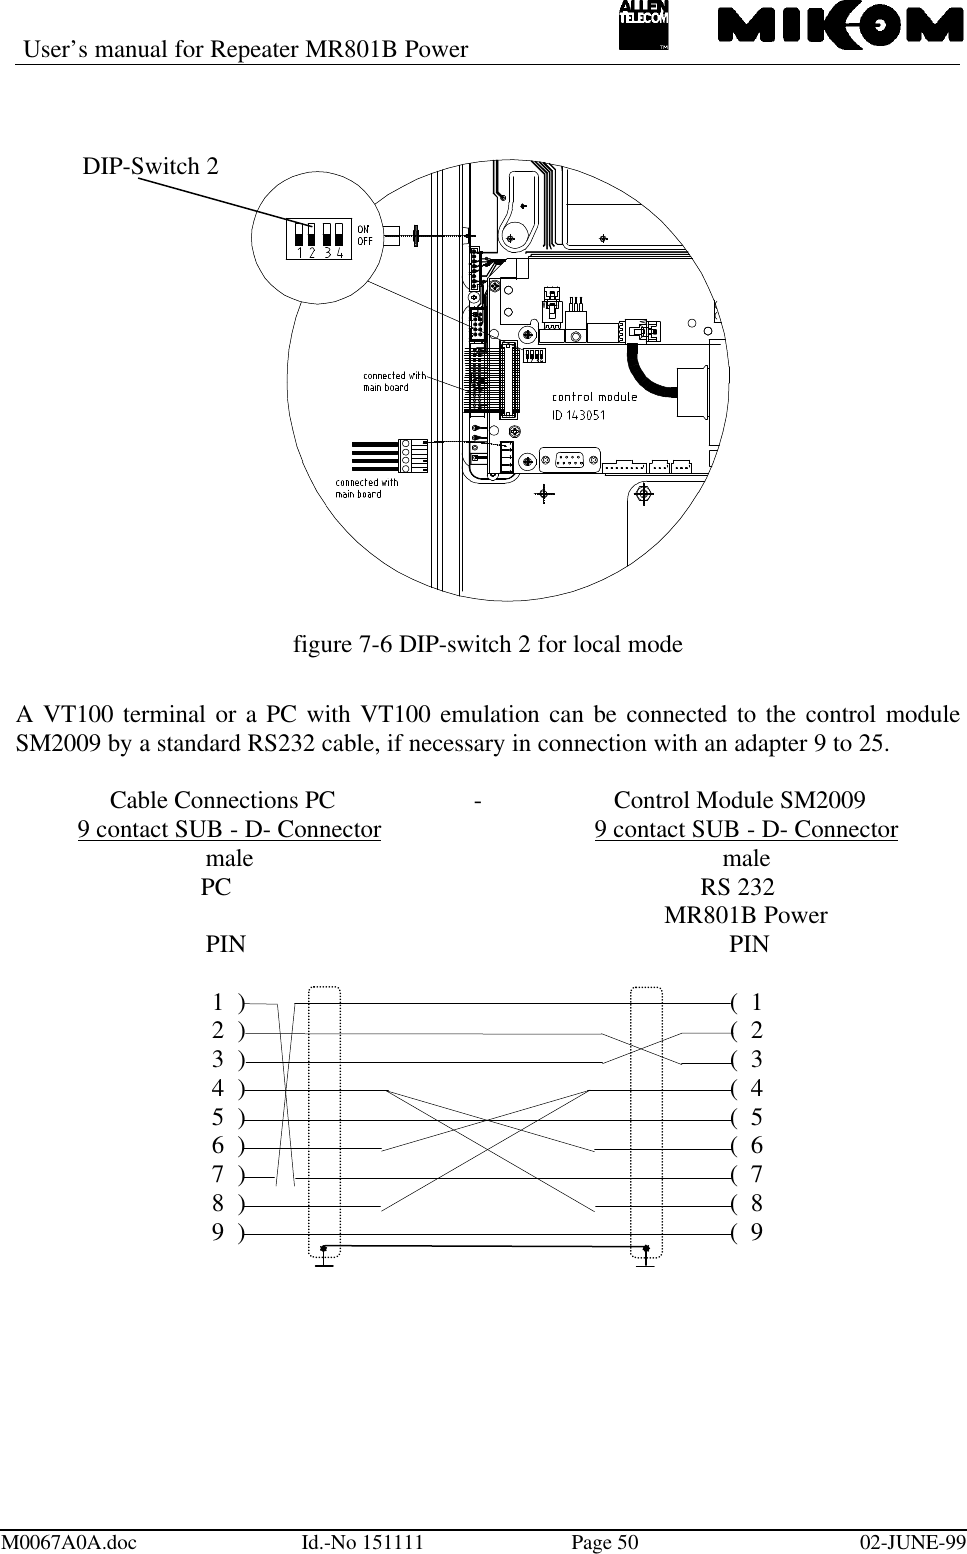 User’s manual for Repeater MR801B PowerM0067A0A.doc Id.-No 151111 Page 50 02-JUNE-99figure 7-6 DIP-switch 2 for local modeA VT100 terminal or a PC with VT100 emulation can be connected to the control moduleSM2009 by a standard RS232 cable, if necessary in connection with an adapter 9 to 25.Cable Connections PC                      -                     Control Module SM20099 contact SUB - D- Connector 9 contact SUB - D- Connectormale malePC               RS 232MR801B PowerPIN           PIN1  )                                                                        (  12  )                                                                        (  23  )                                                                        (  34  )                                                                        (  45  )                                                                        (  56  )                                                                         (  67  )                                                                        (  78  )                                                                        (  89  )                                                                          (  9DIP-Switch 2